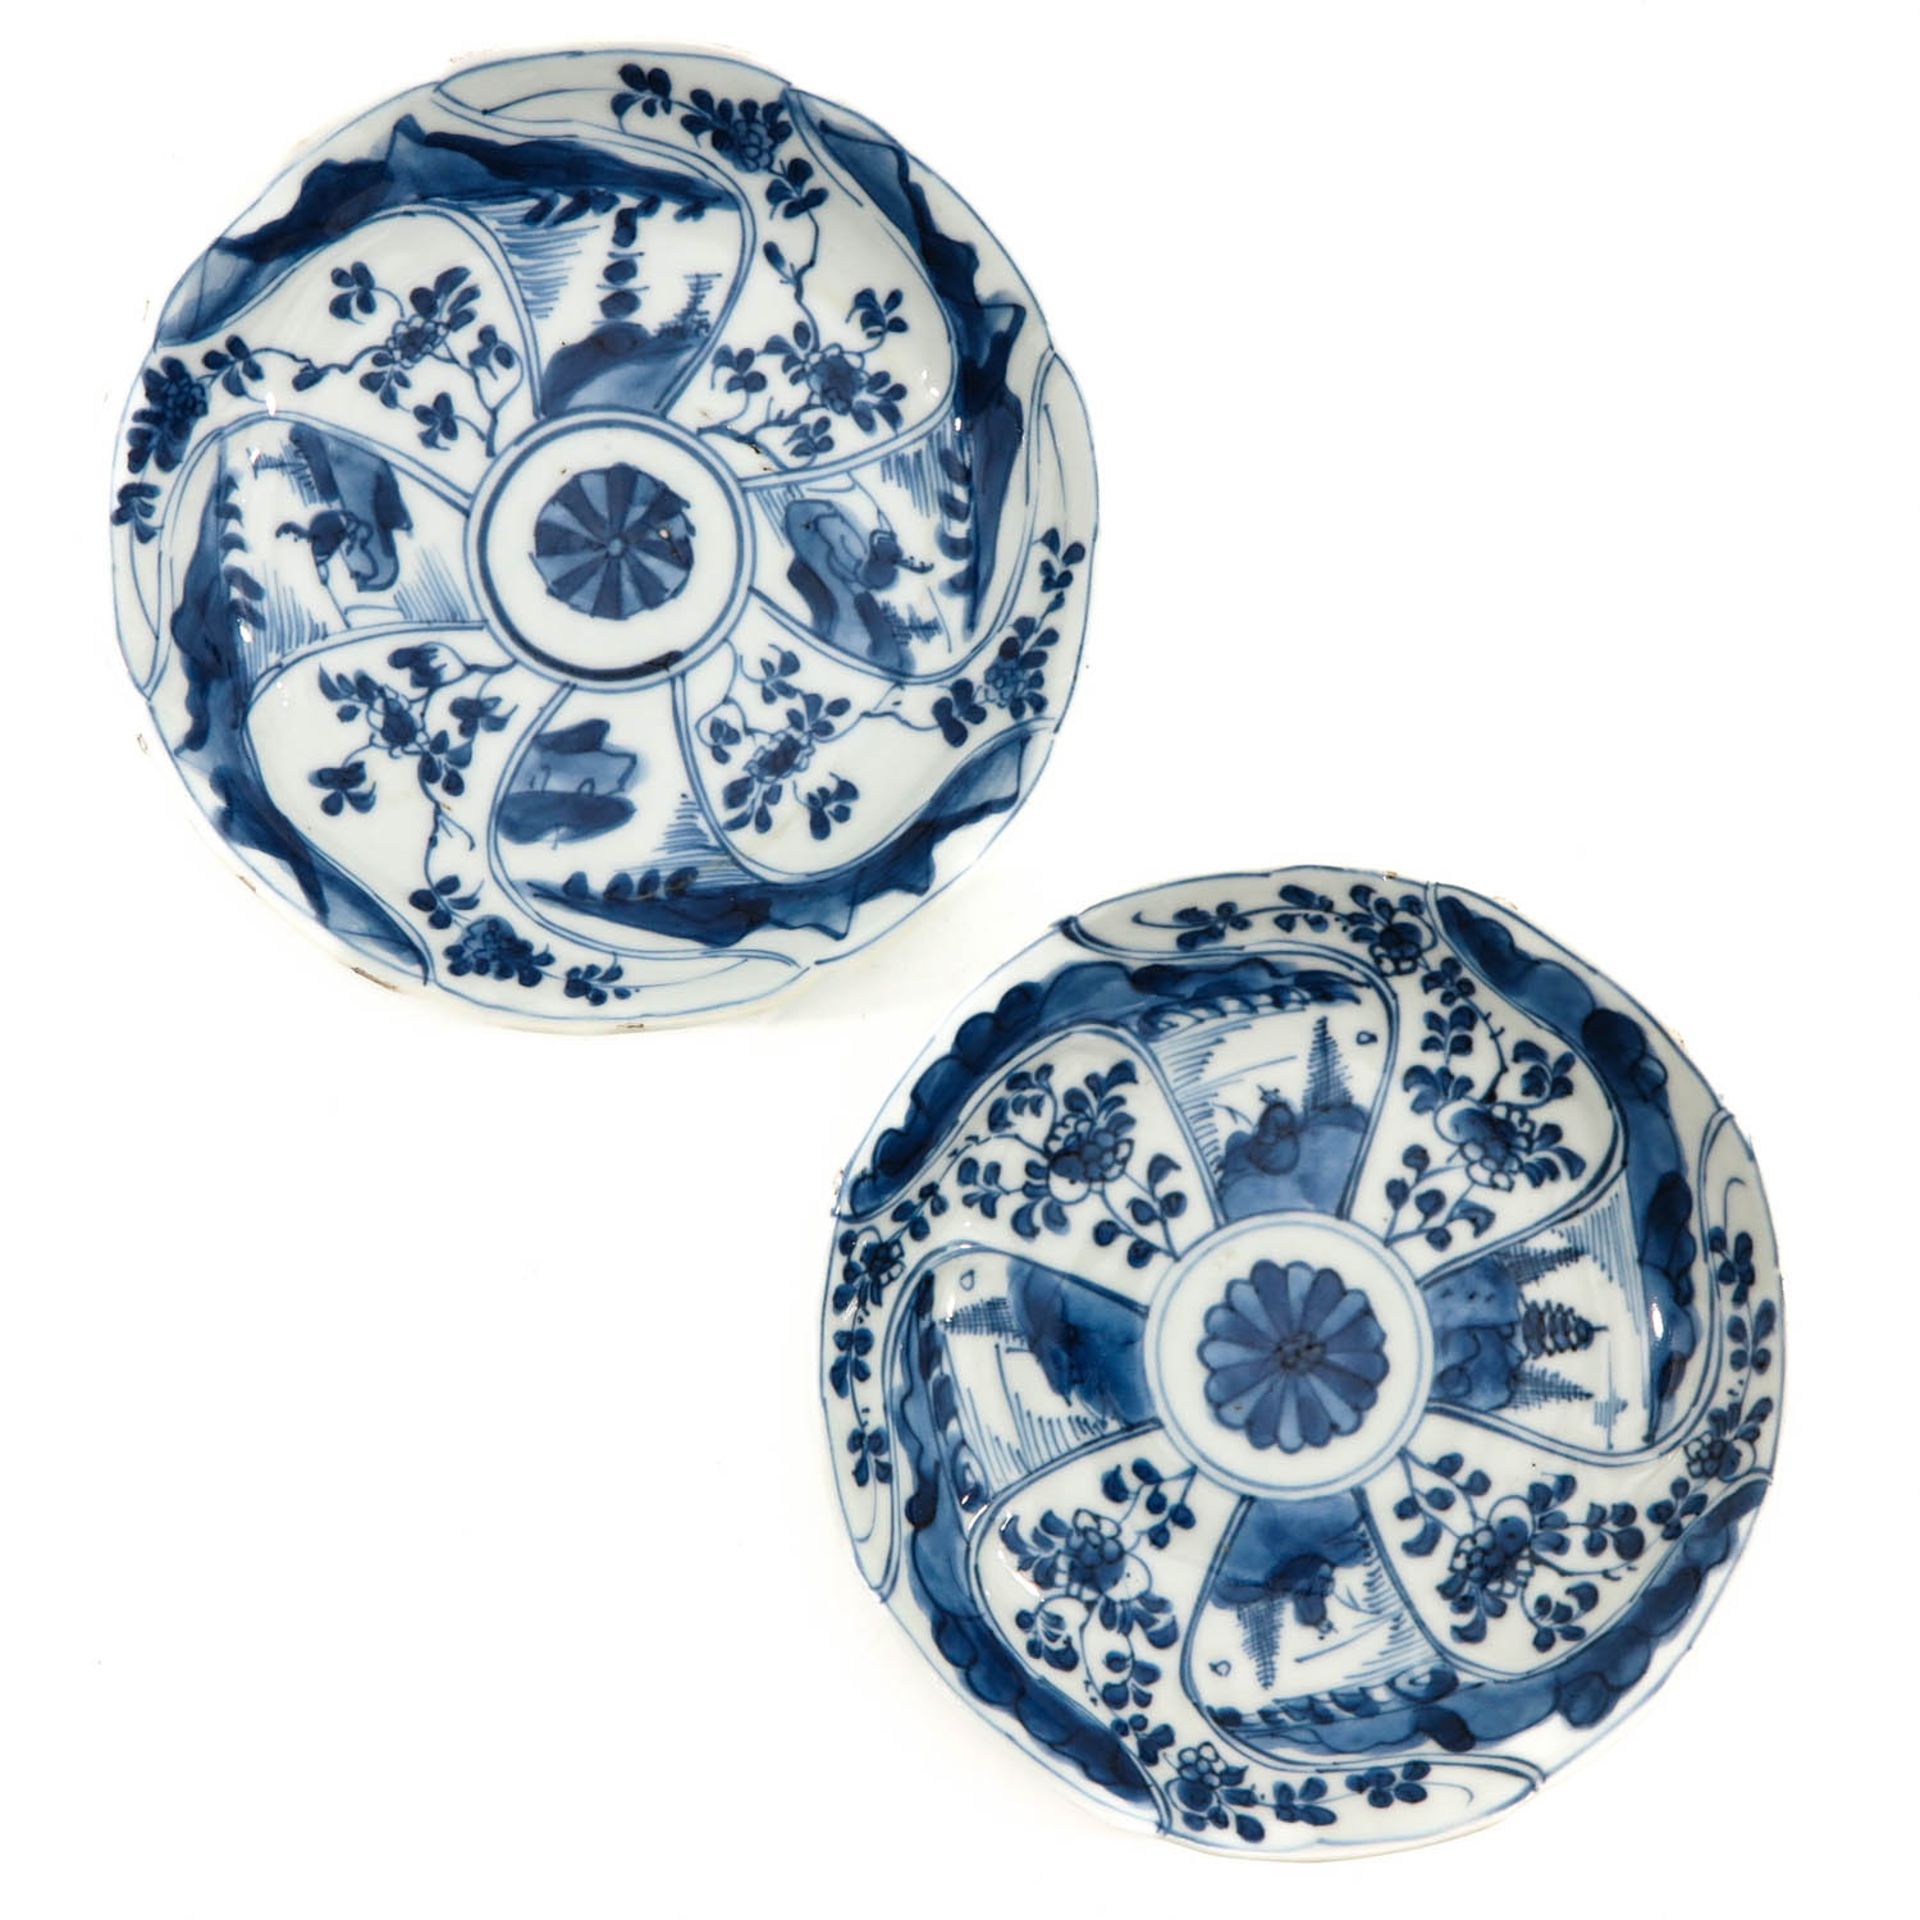 A Series of 6 Blue and White Small Plates - Image 3 of 10